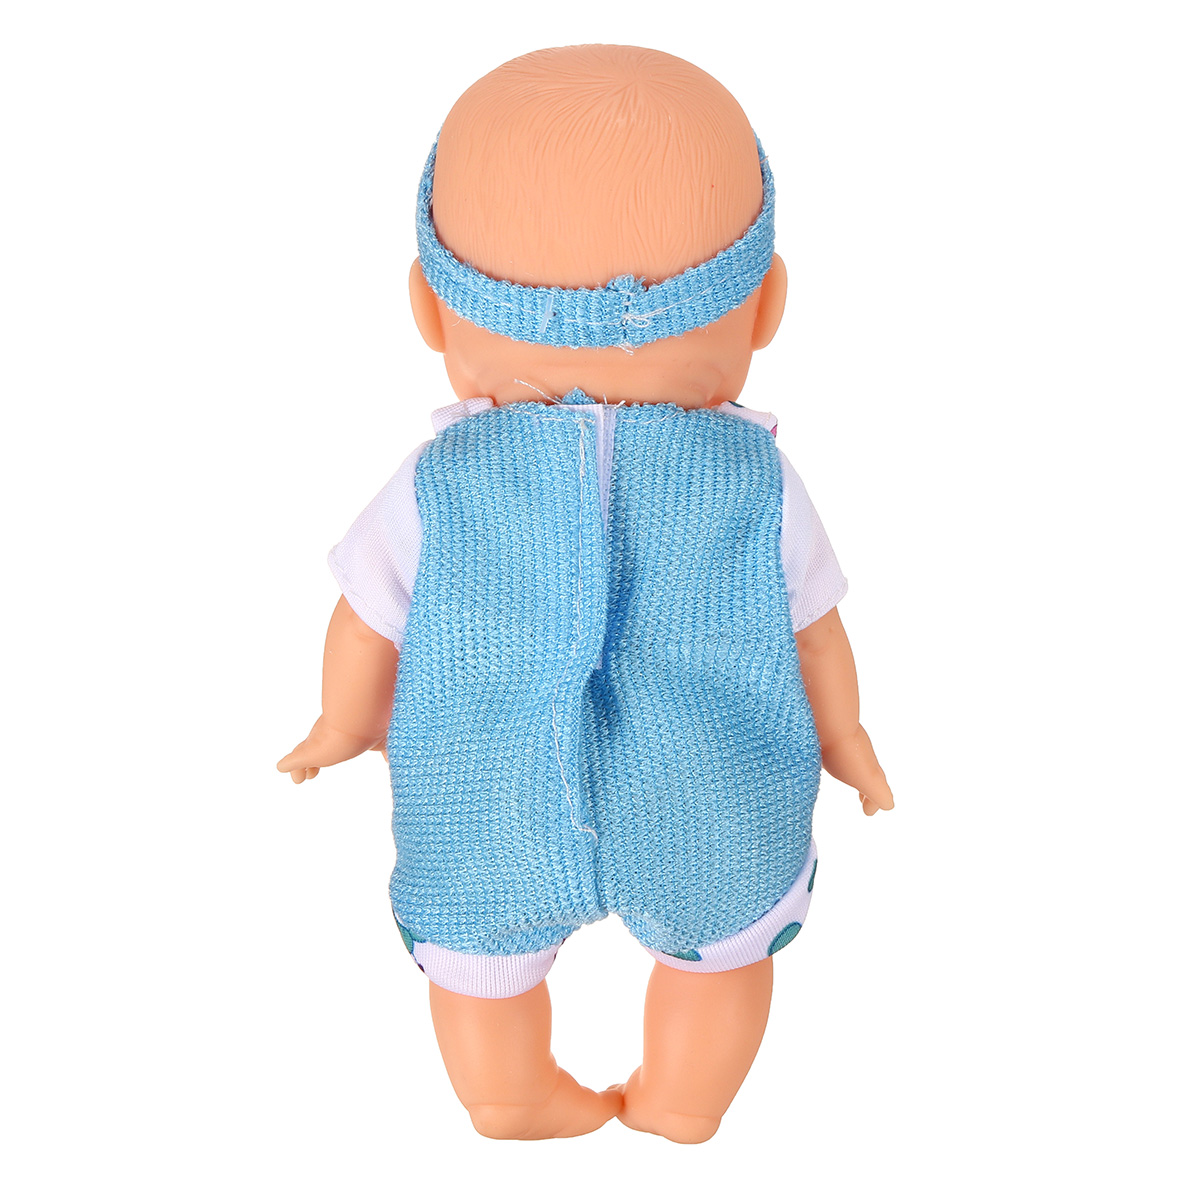 Simulation-Baby-3D-Creative-Cute-Doll-Play-House-Toy-Doll-Vinyl-Doll-Gift-1818656-14